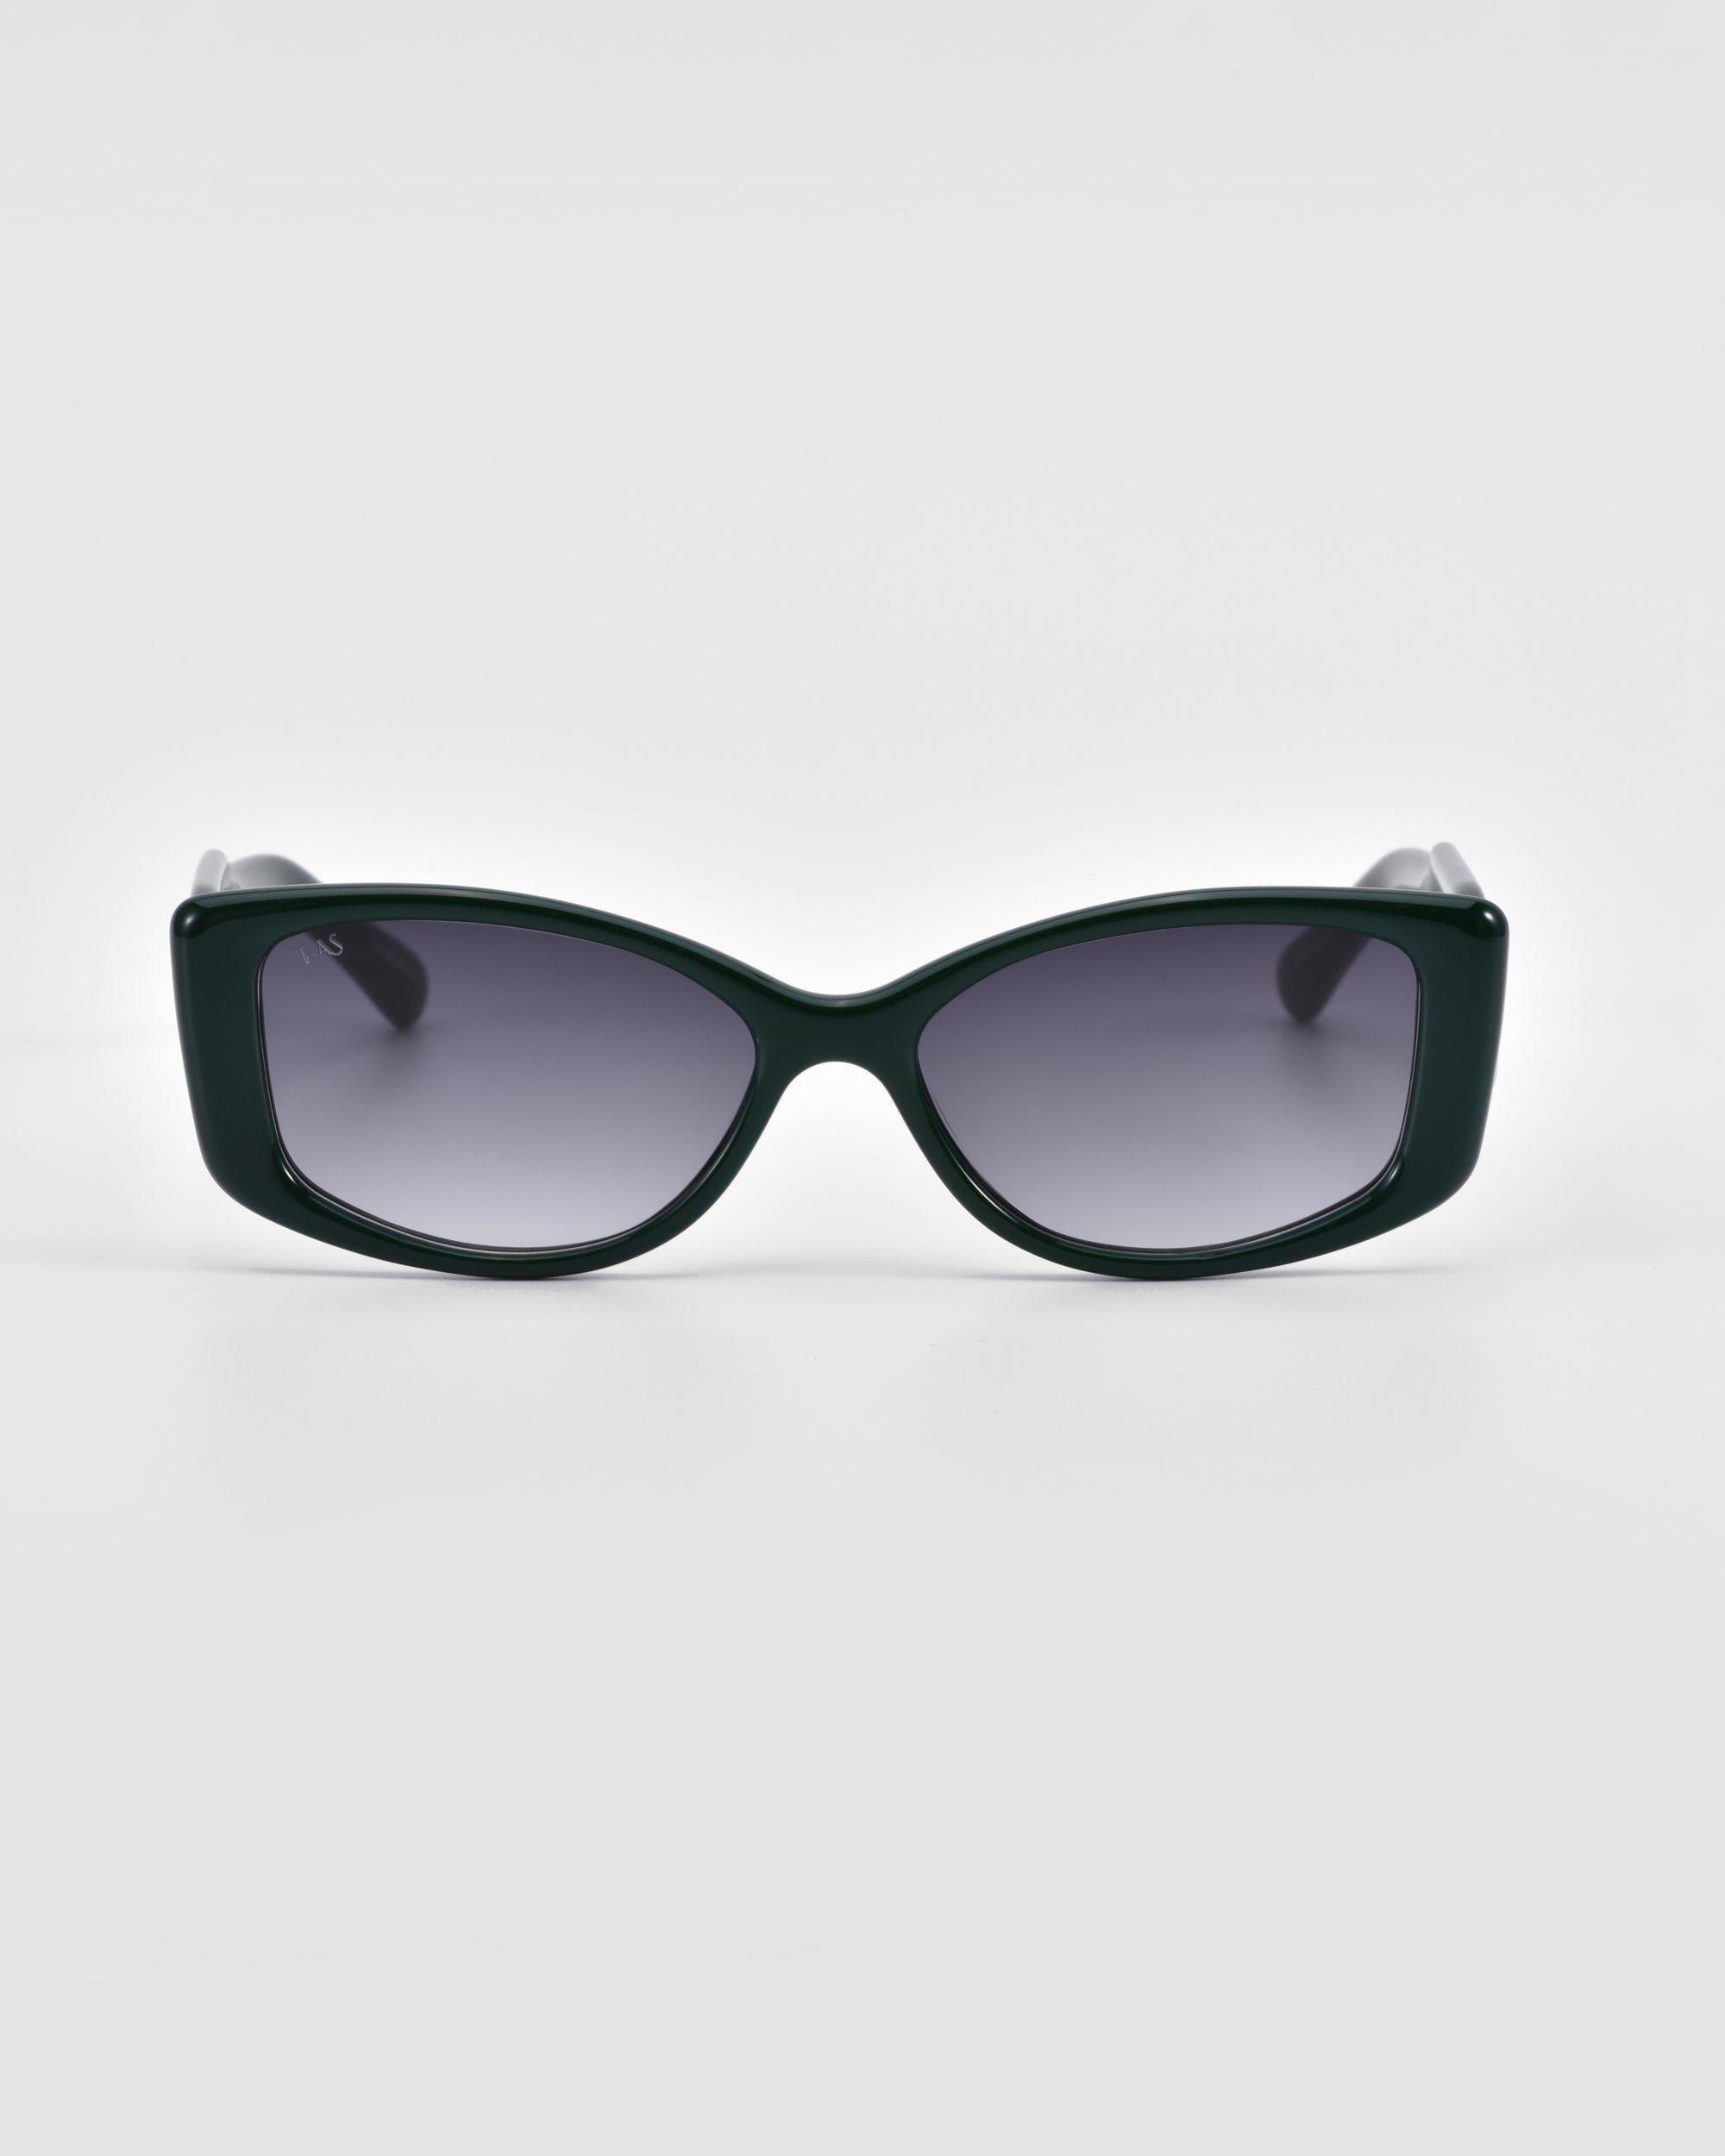 A pair of Mene by For Art's Sake® luxury frames in a cat-eye style with gradient grey lenses is centered against a white background.